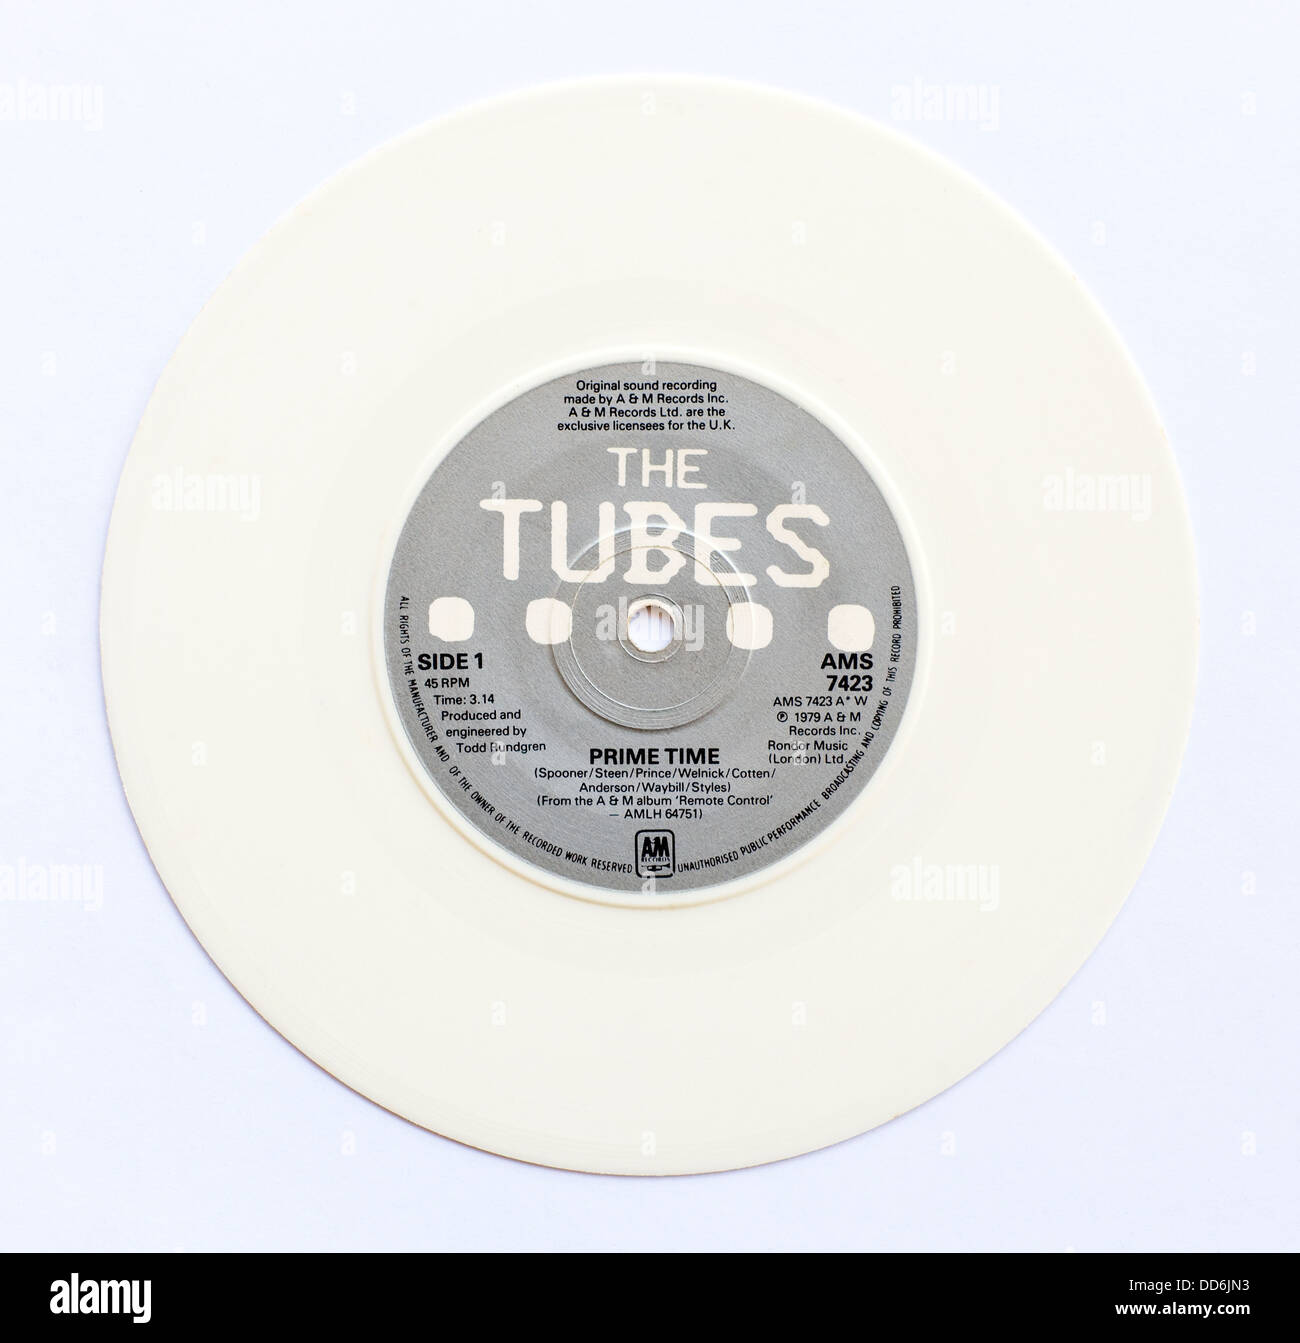 The Tubes - Prime Time, 1979 7' single, white vinyl on A&M Records - Editorial use only Stock Photo